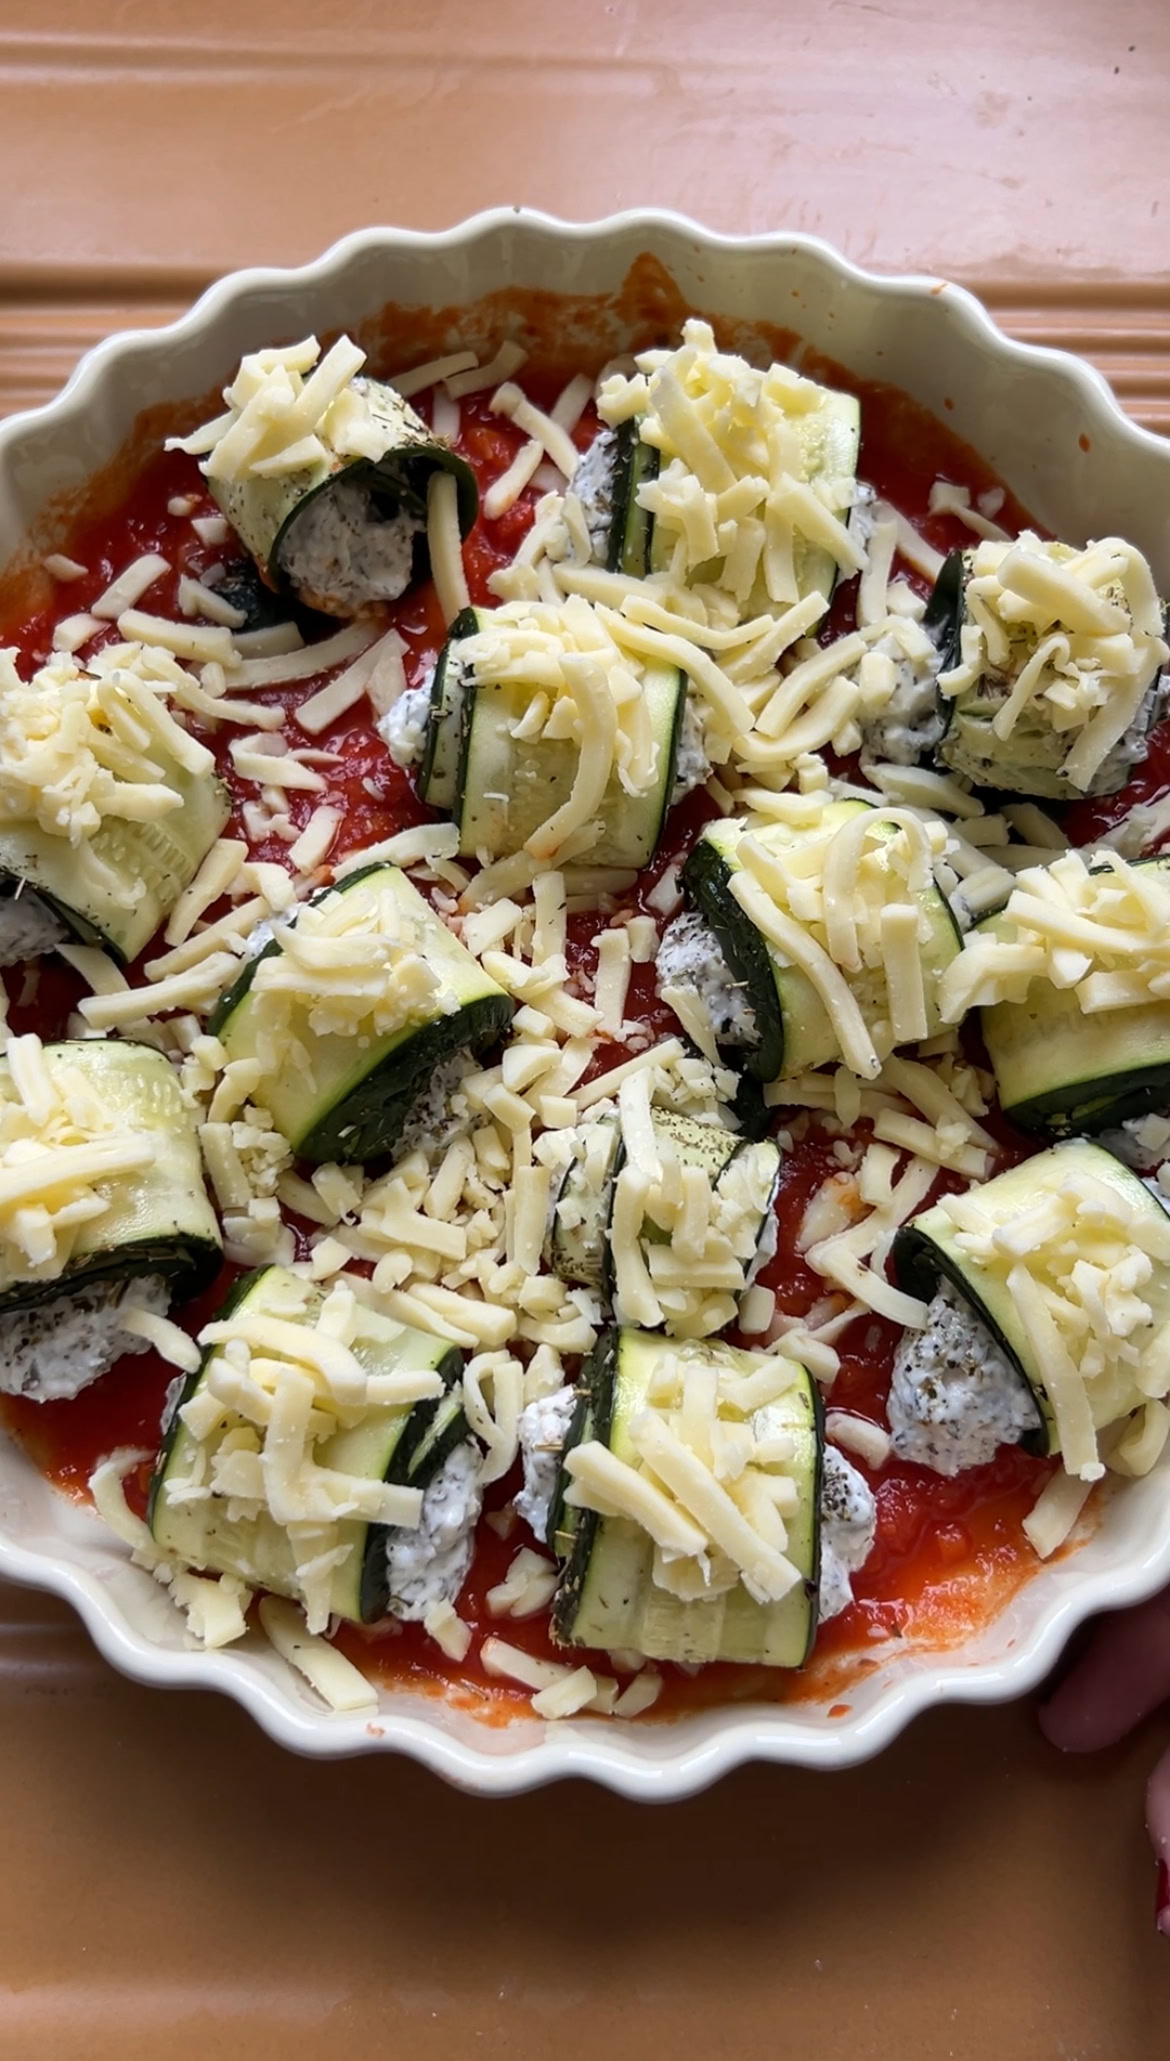 Grated mozzarella is added to the top of each involtini.